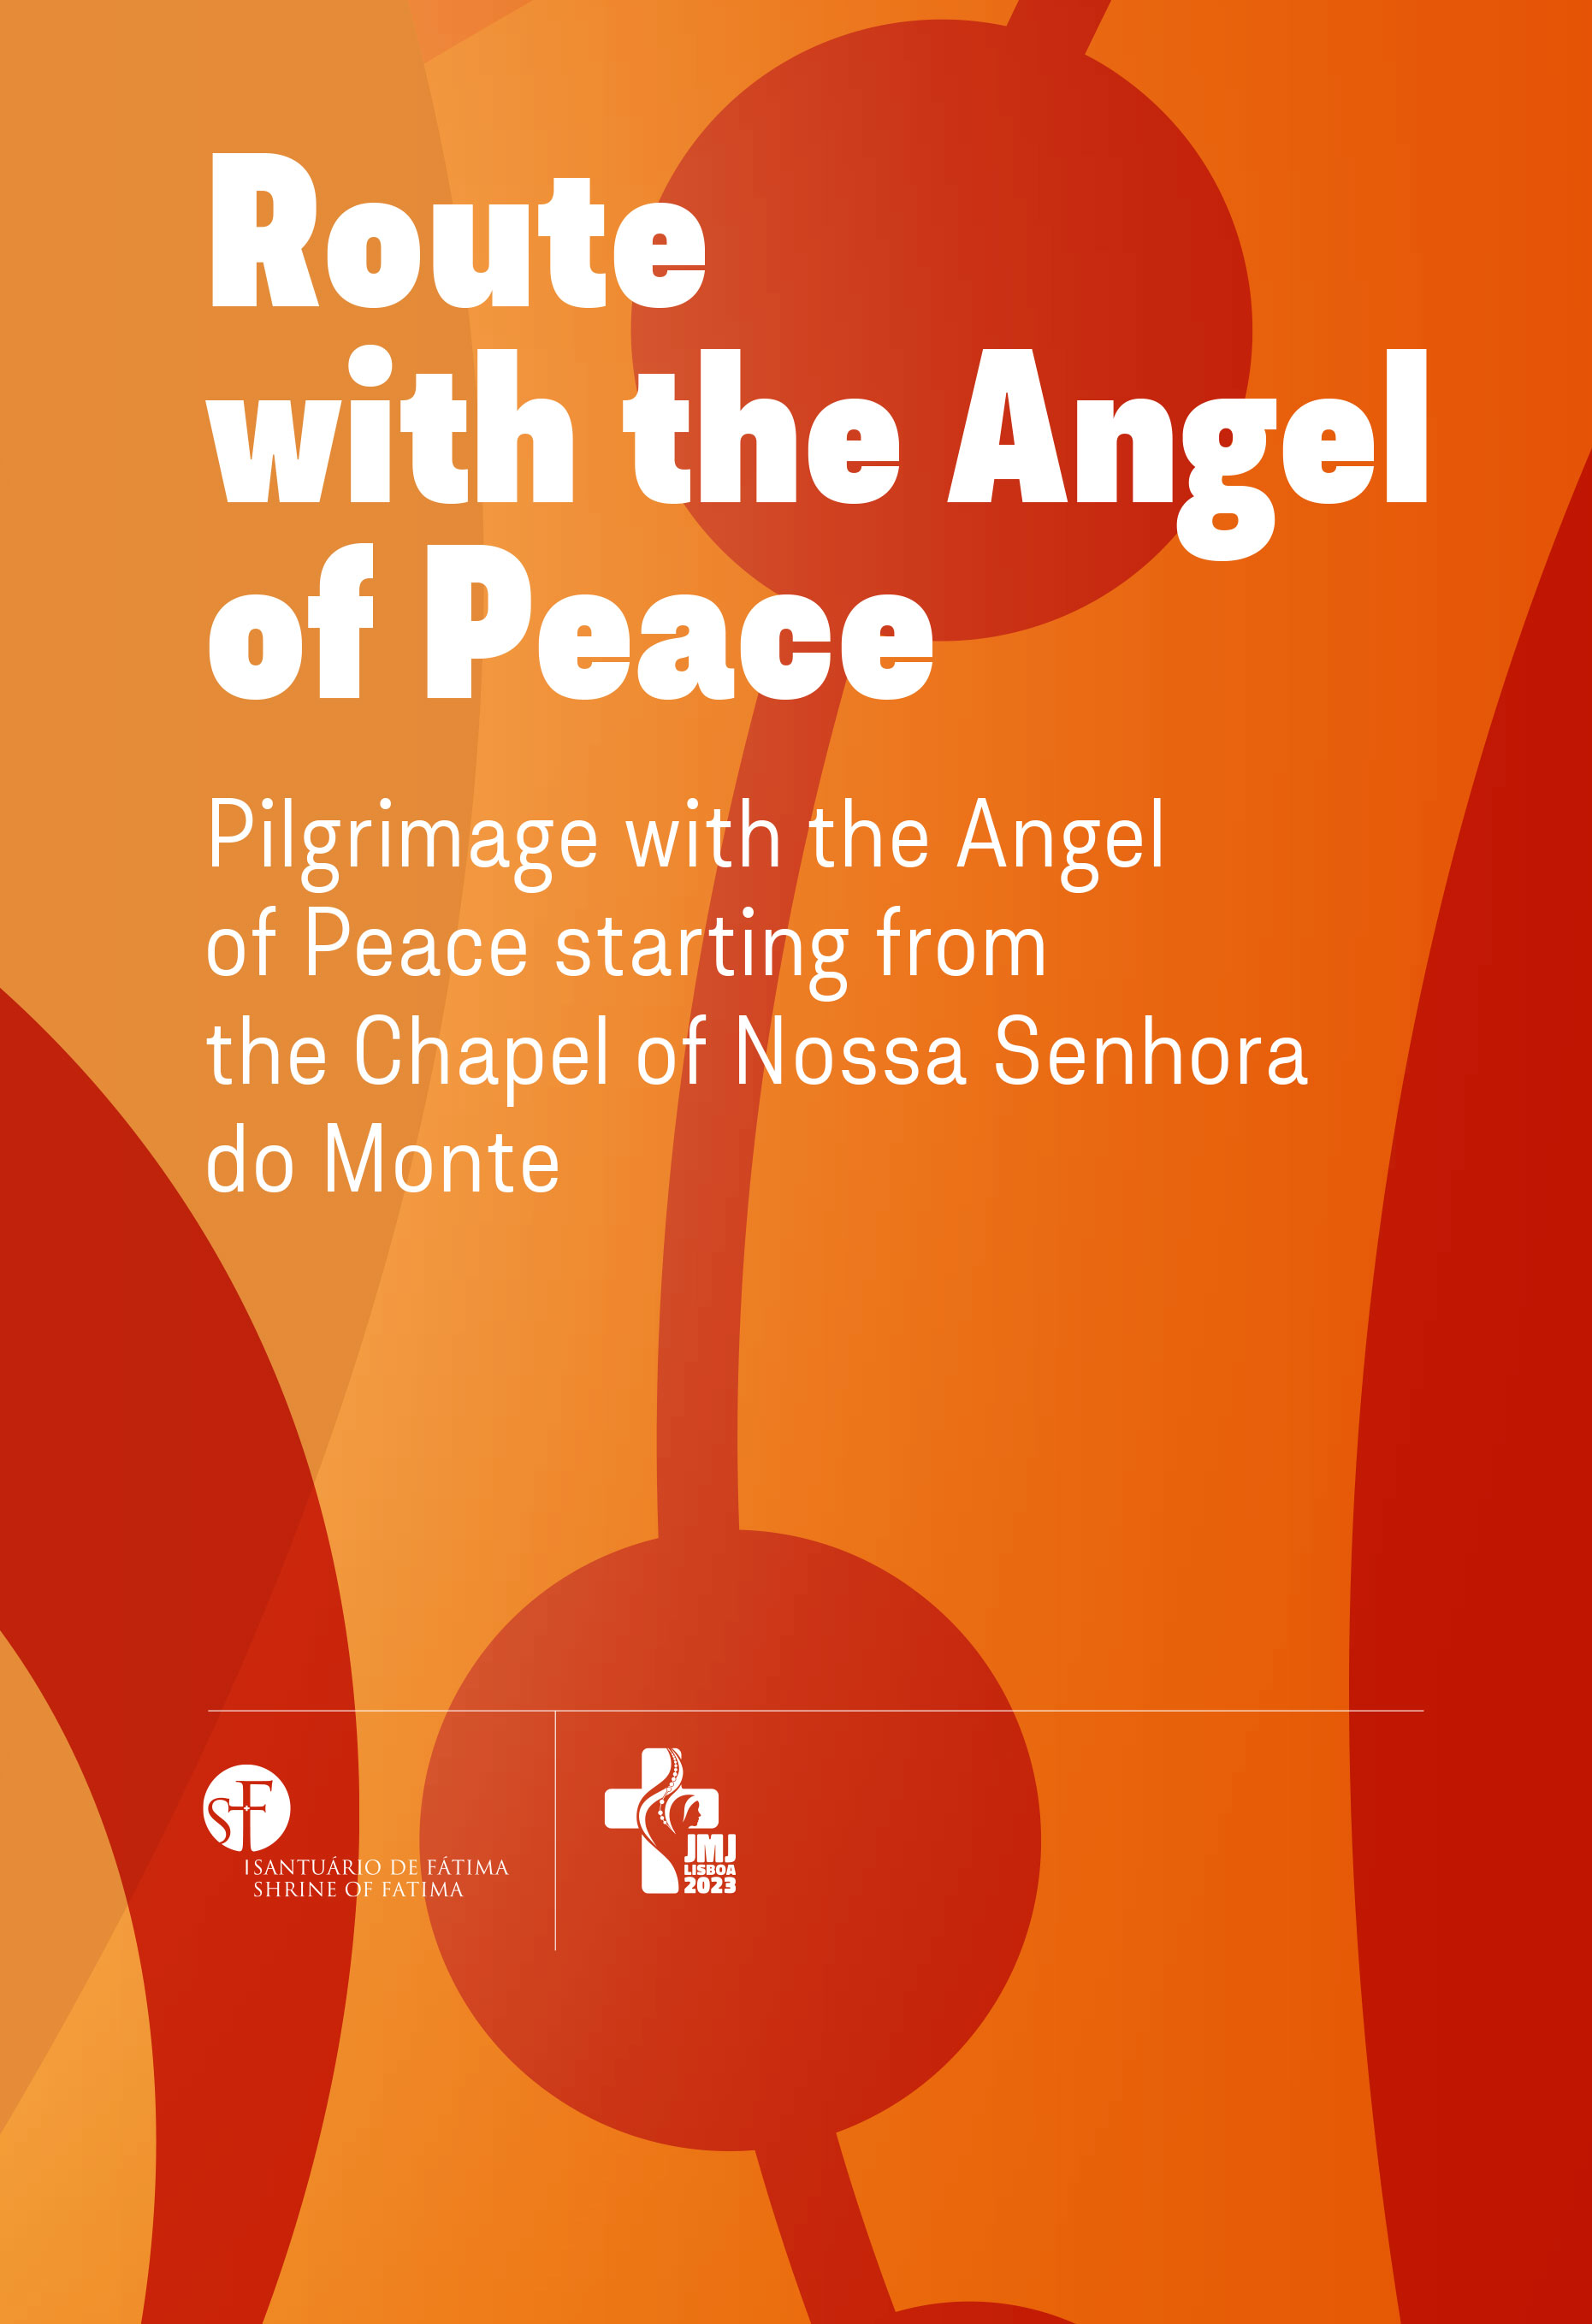 6-route-with-the-angel-of-peace-1.jpg